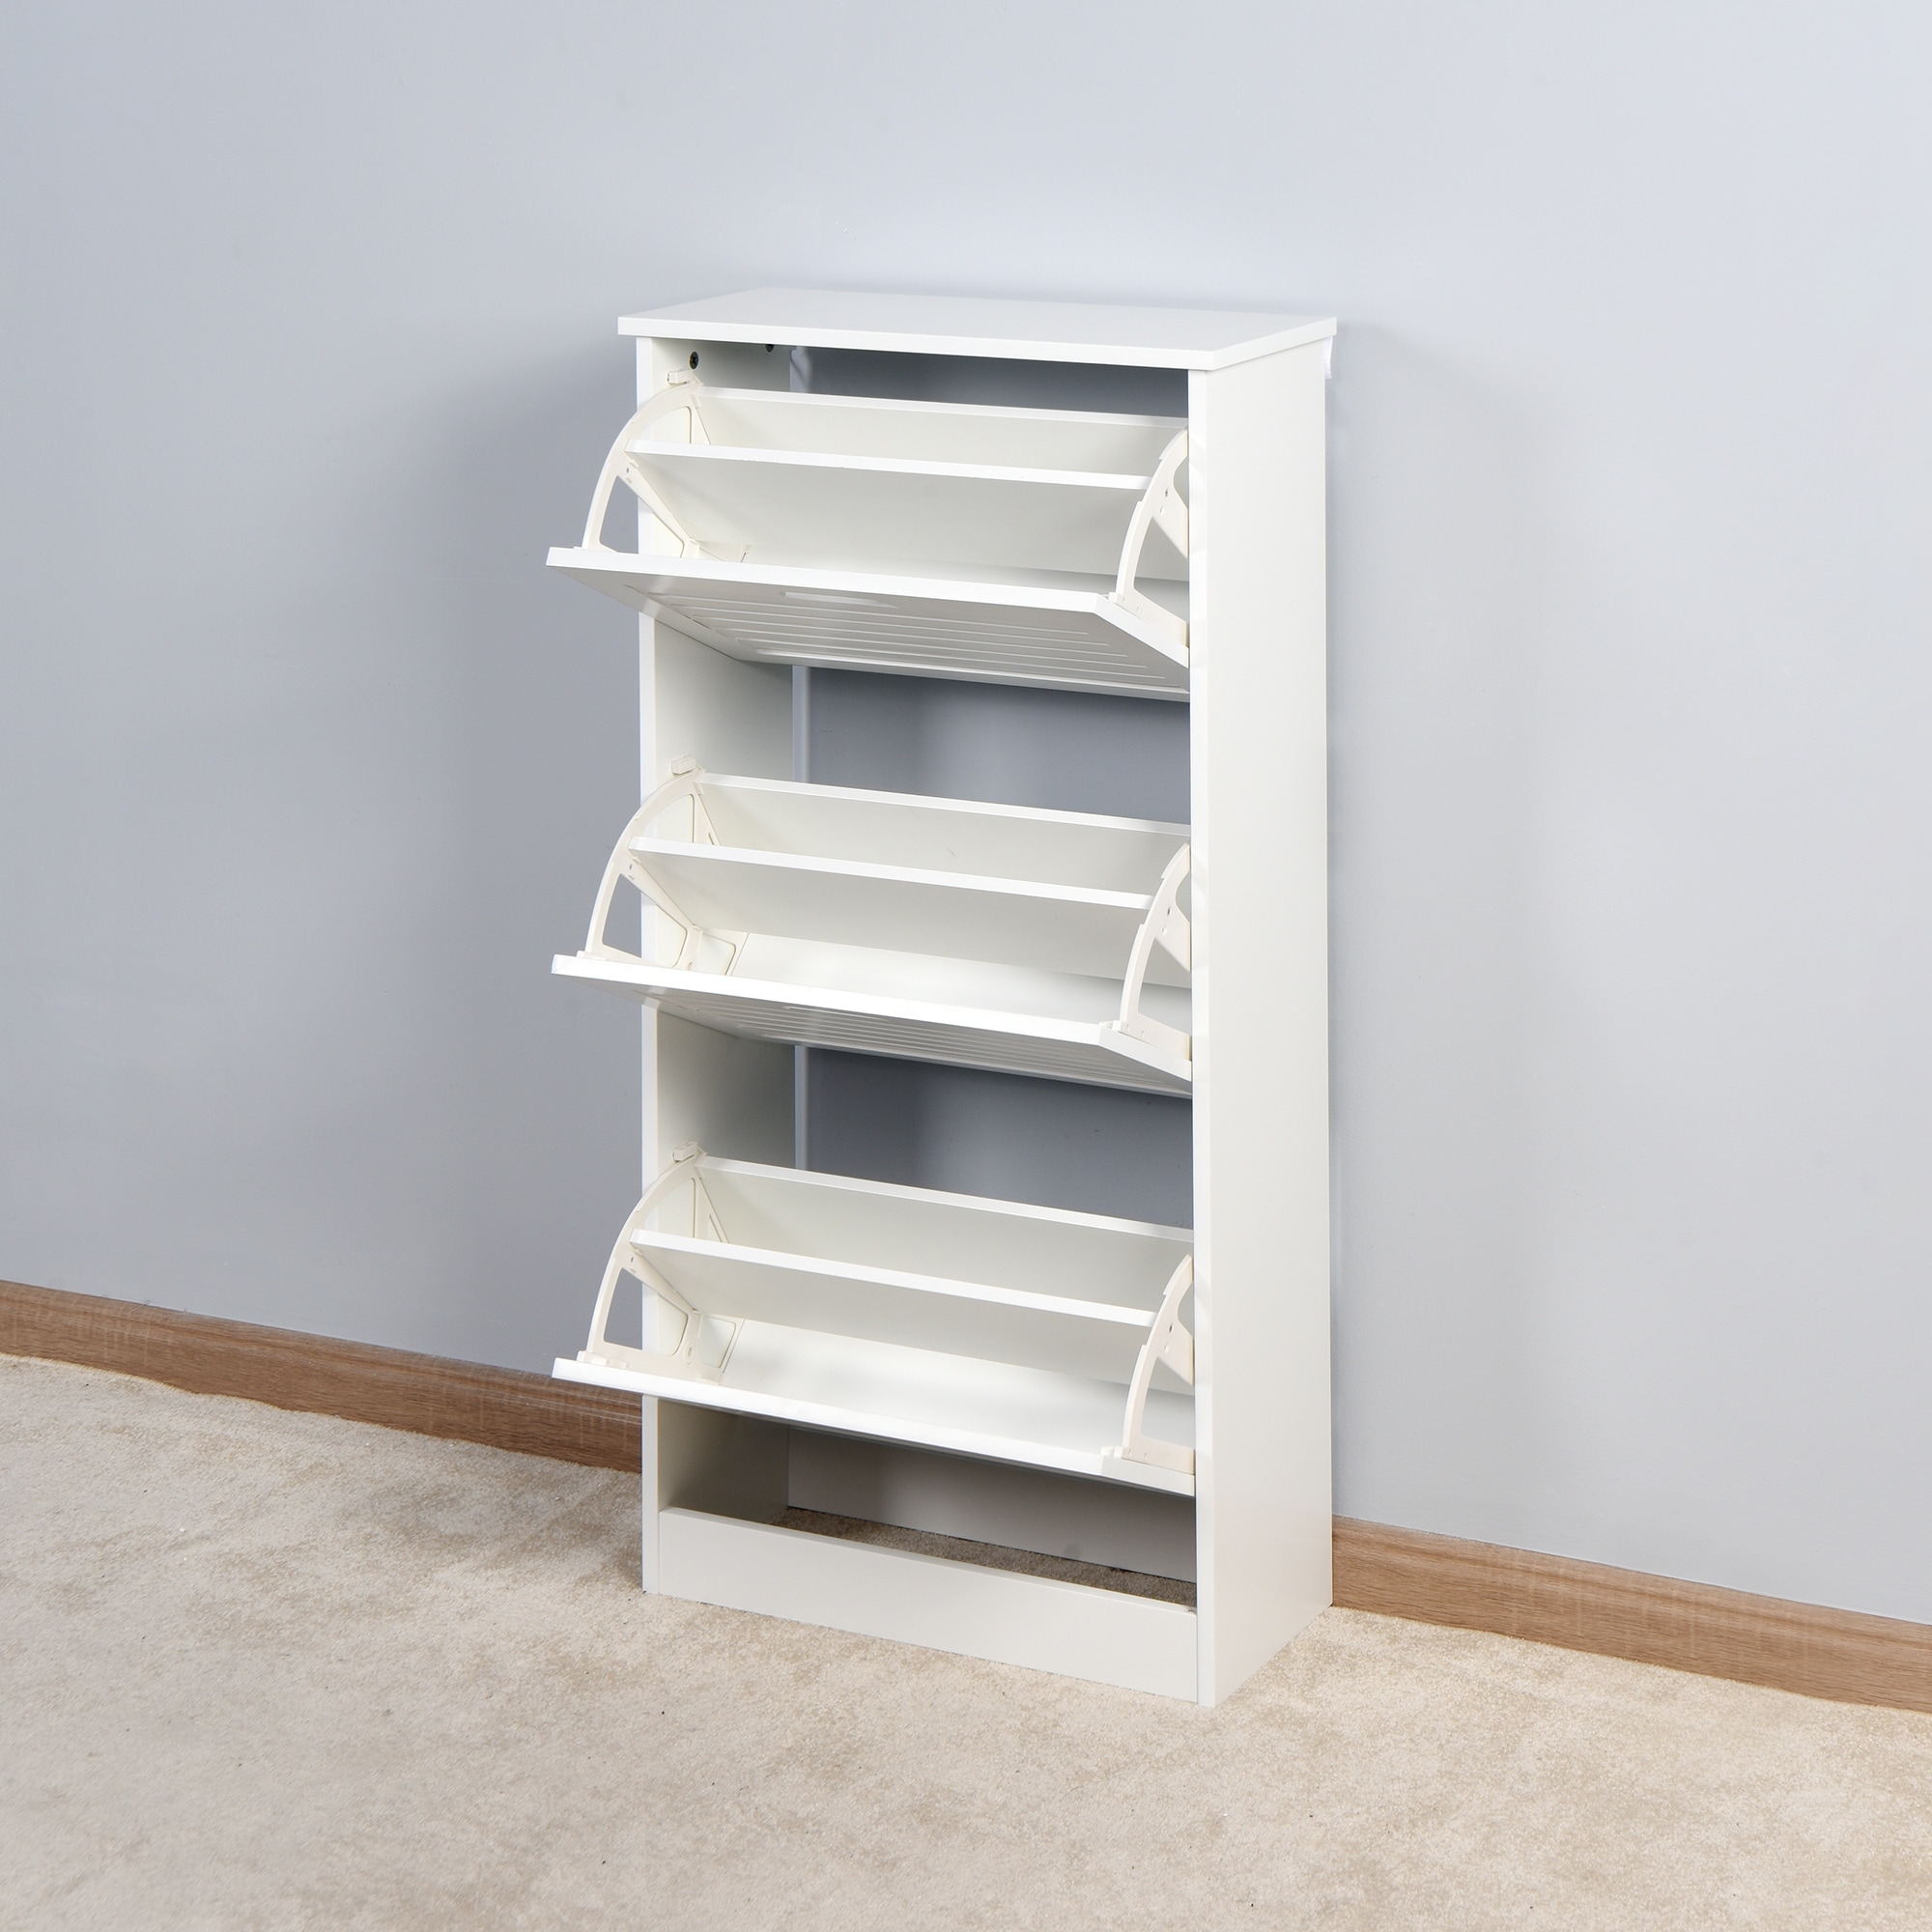 https://ak1.ostkcdn.com/images/products/is/images/direct/8cdcd903c1f17123dc819cd4decfcb73516aba79/White-Wood-12-Pair-Shoe-Storage-Cabinet.jpg